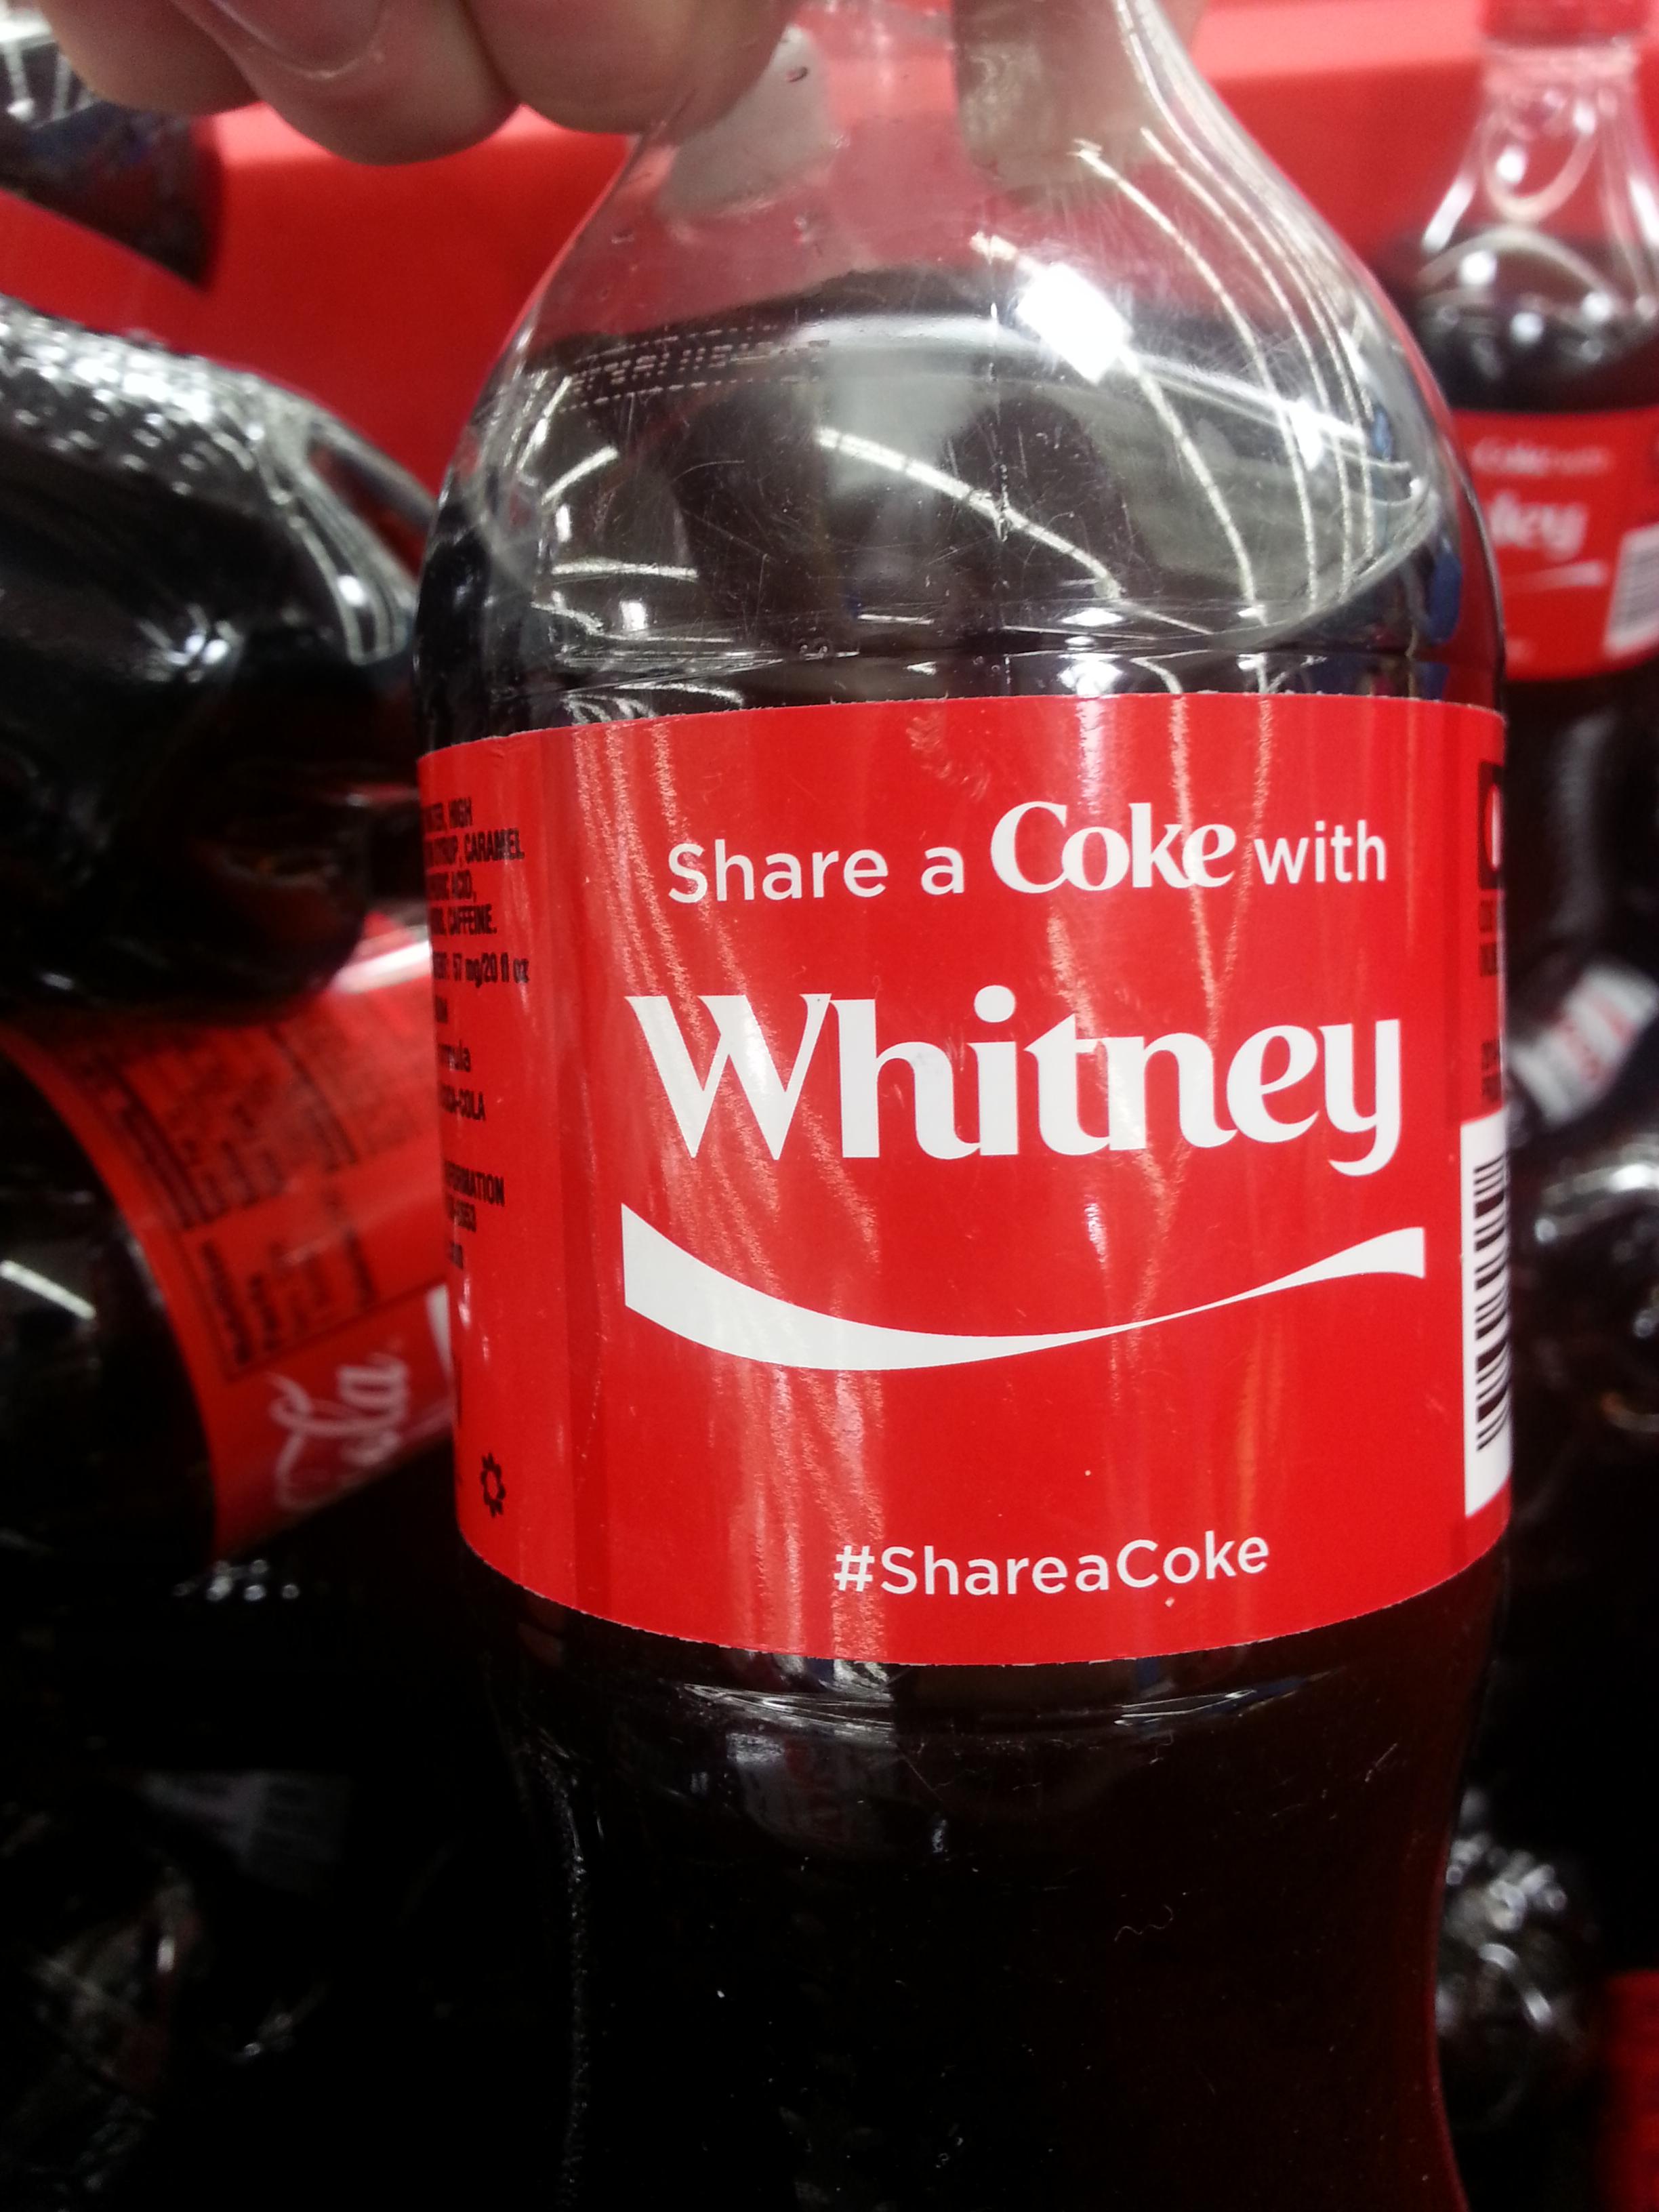 share a coke with whitney - a Coke with Whitney